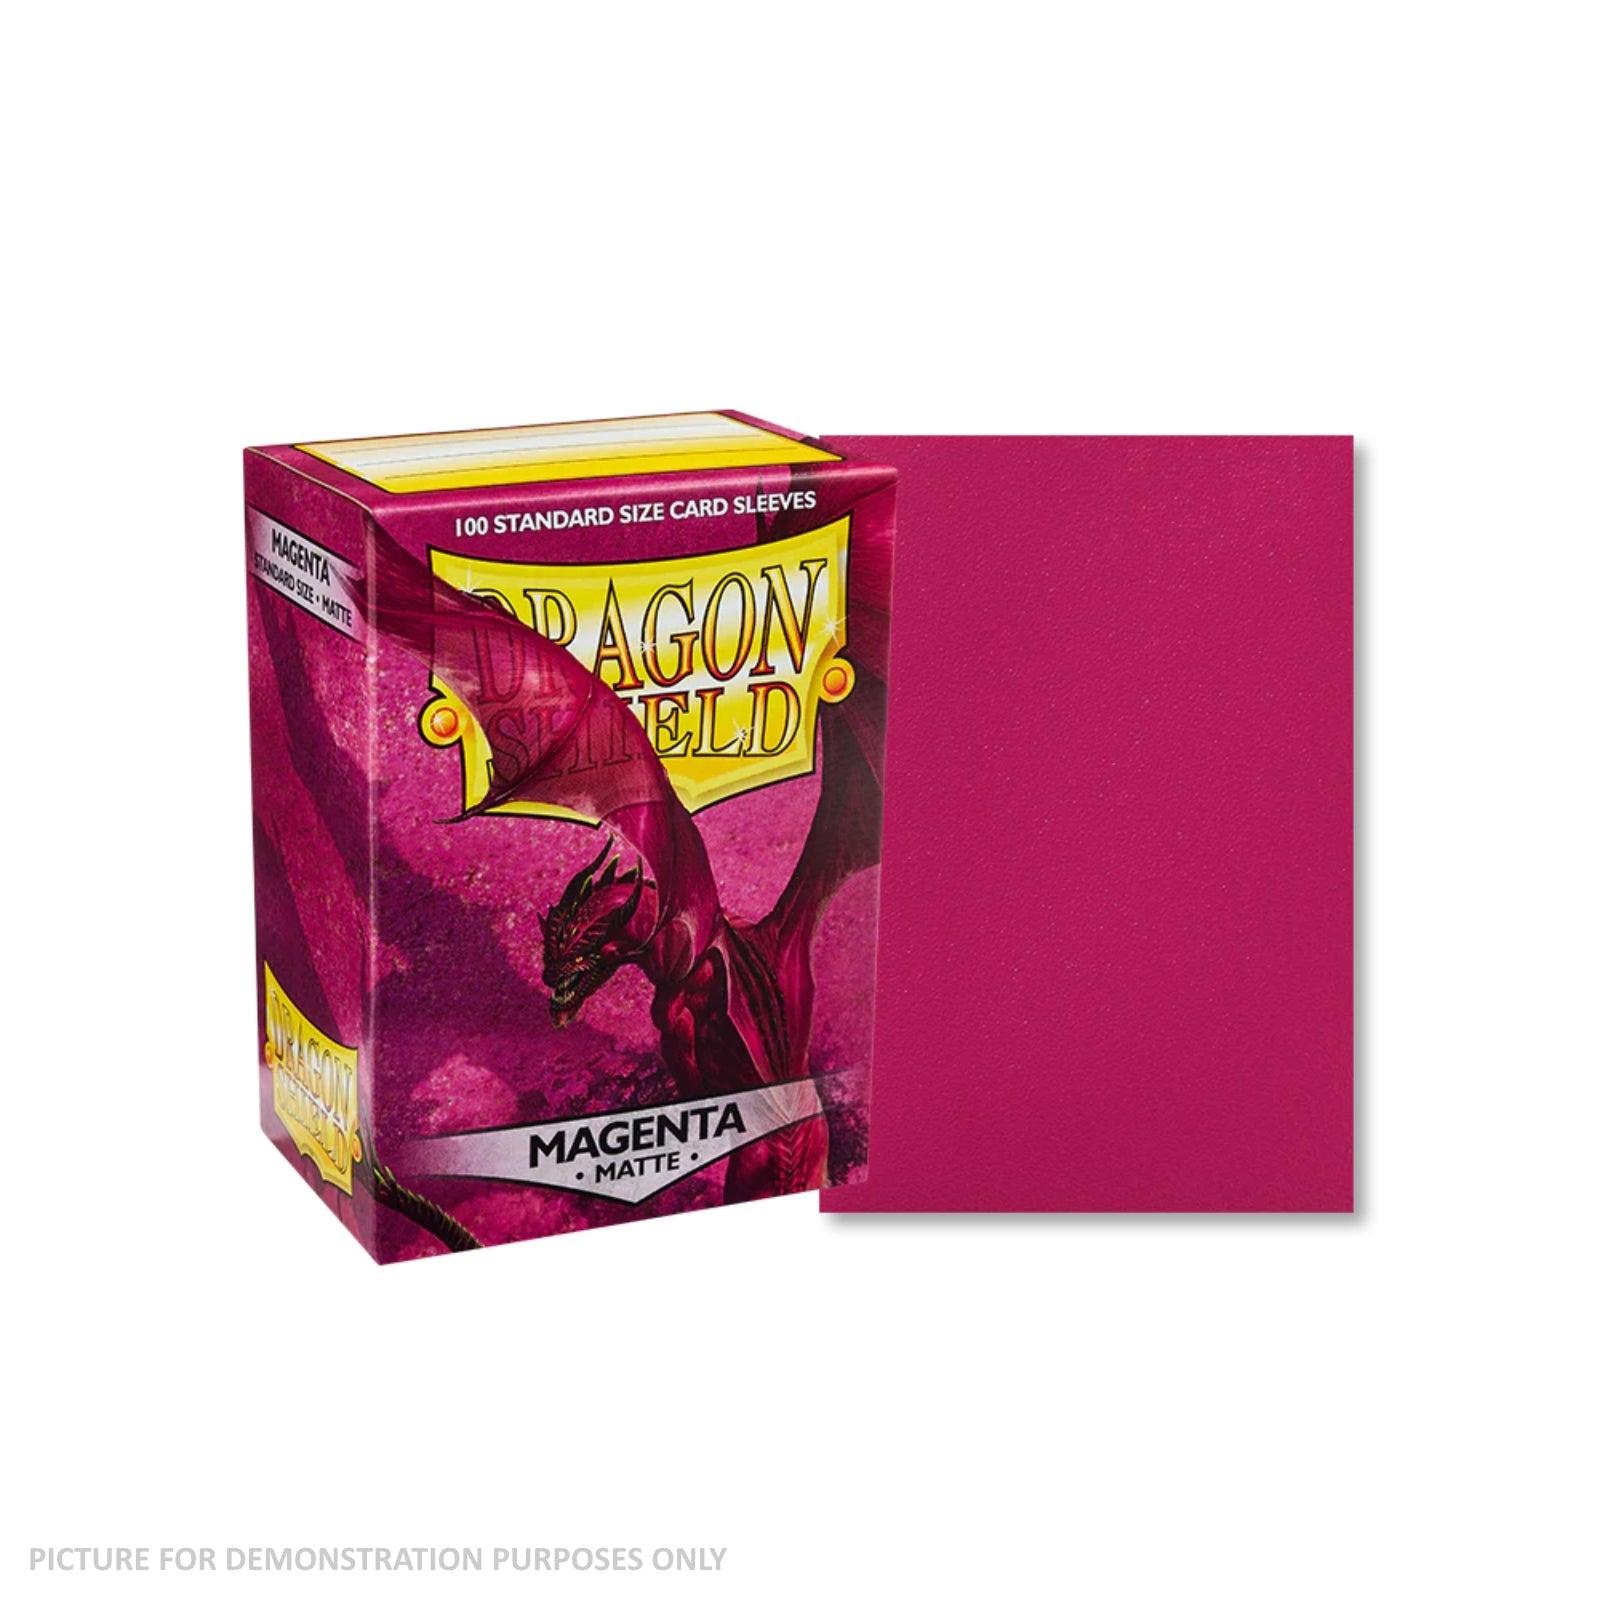 Dragon Shield 100 Standard Size Card Sleeves - Matte Crimson – Online Coins  and Collectables